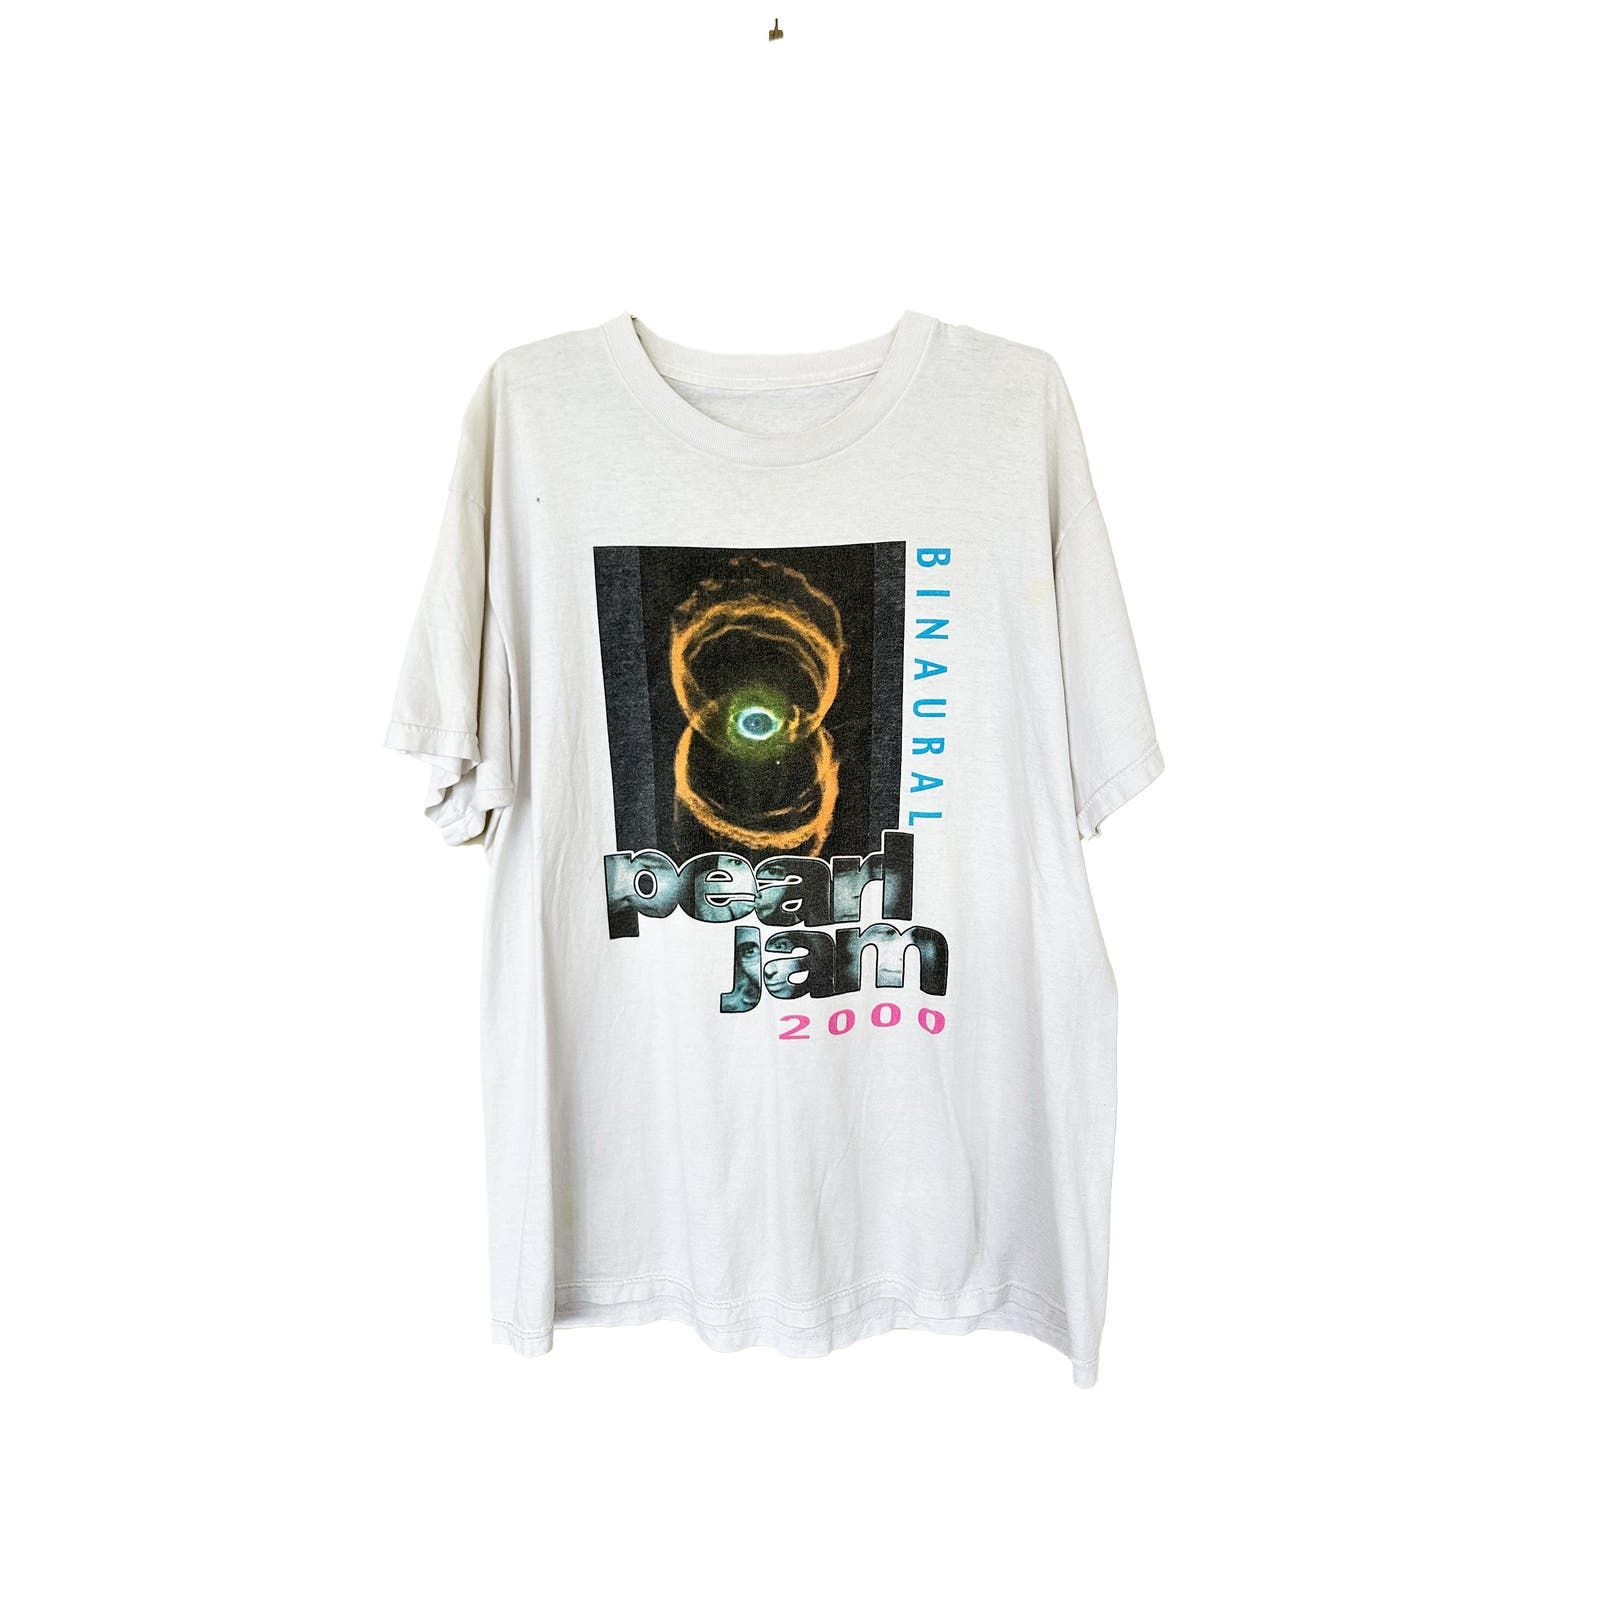 Pre-owned Vintage Pearl Jam Binaural 200 Tour T-shirt In White